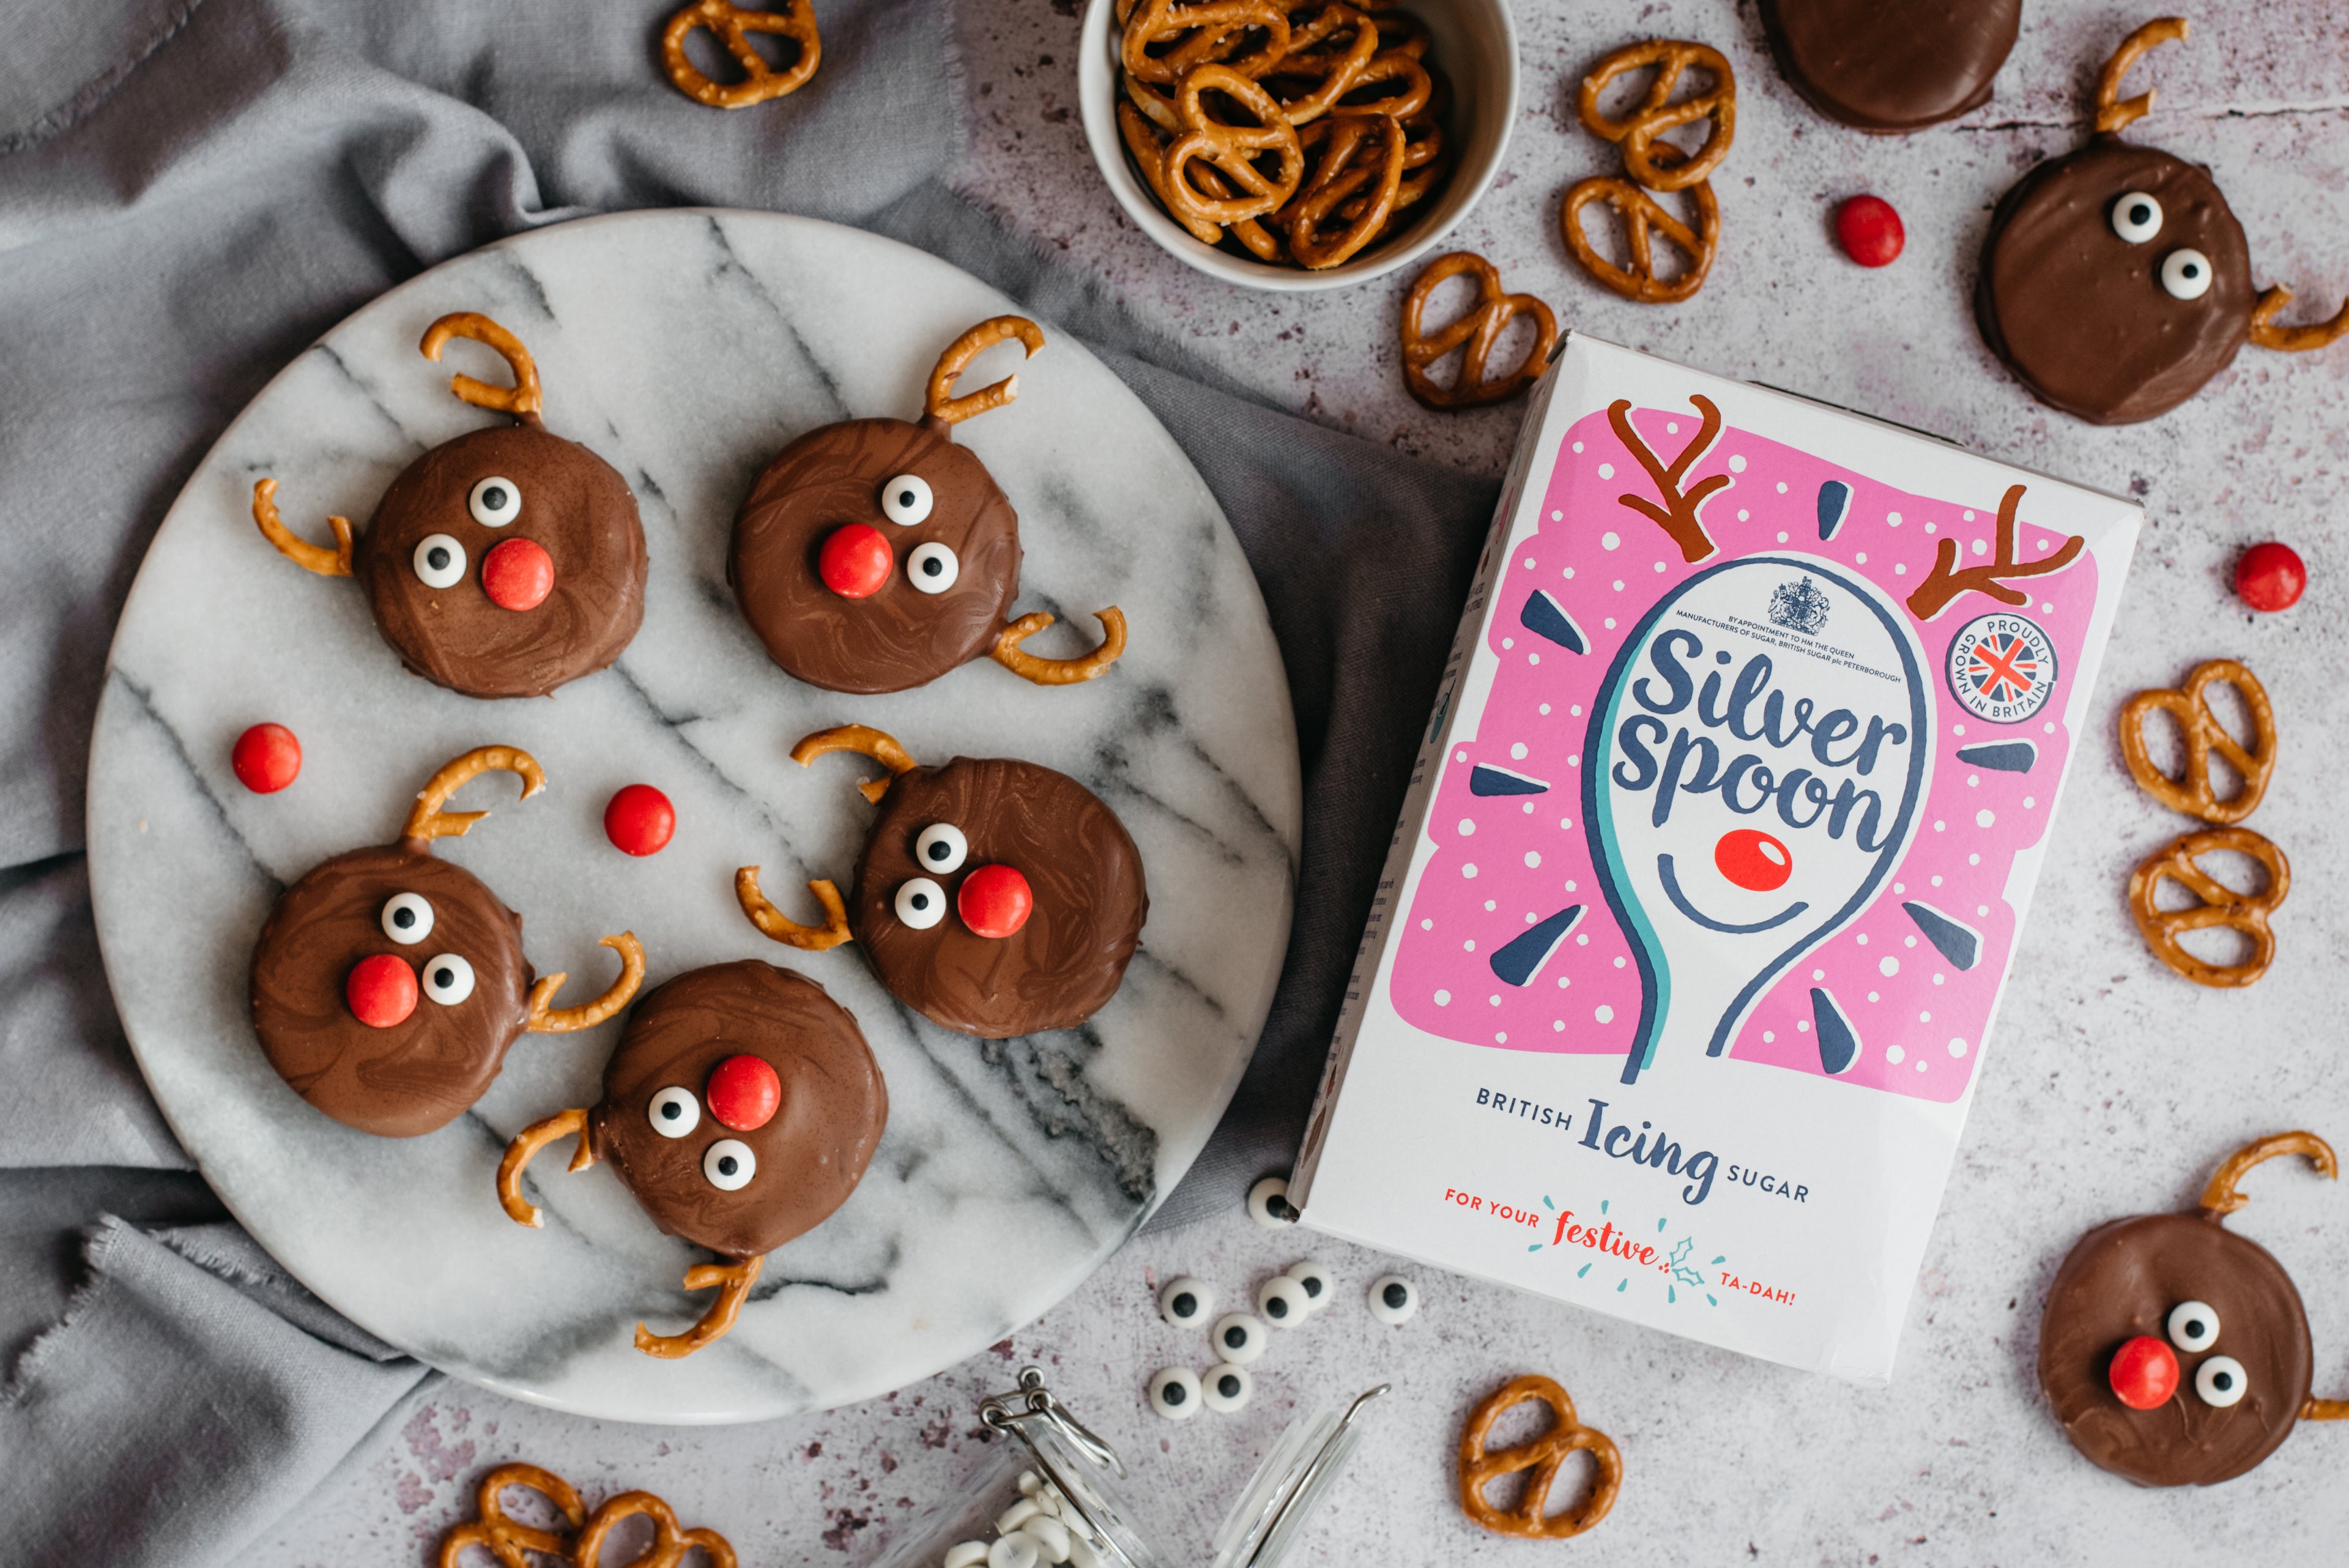 Reindeer Orange Creams decorated with pretzels,  top view next to a box of Silver Spoon icing sugar